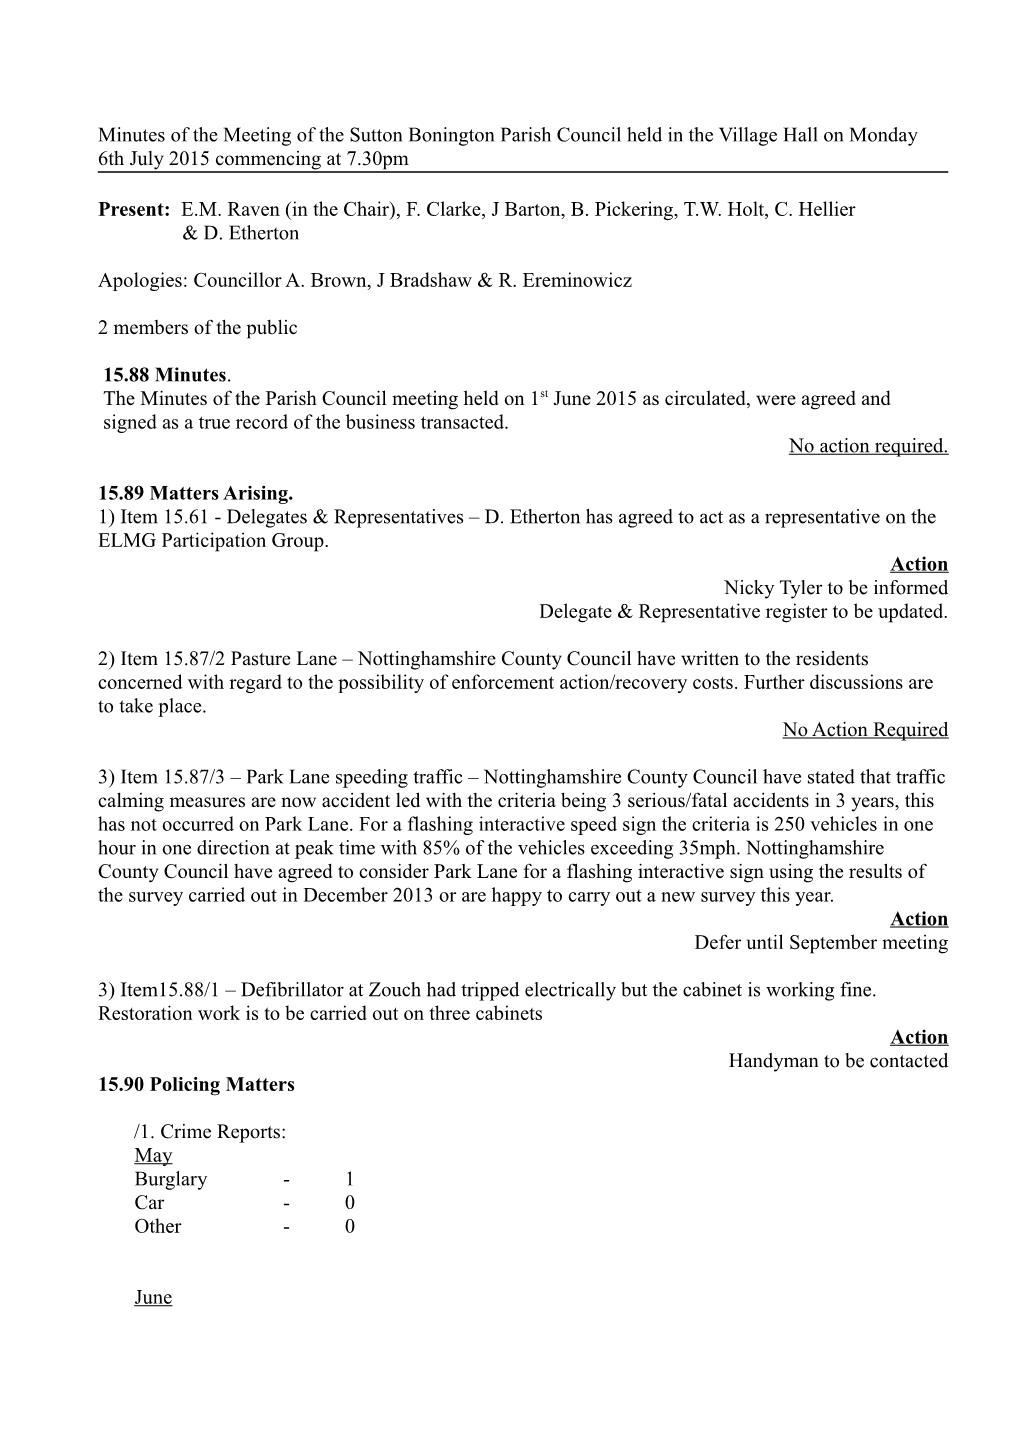 Minutes of the Meeting of the Sutton Bonington Parish Council Held in the Village Hall